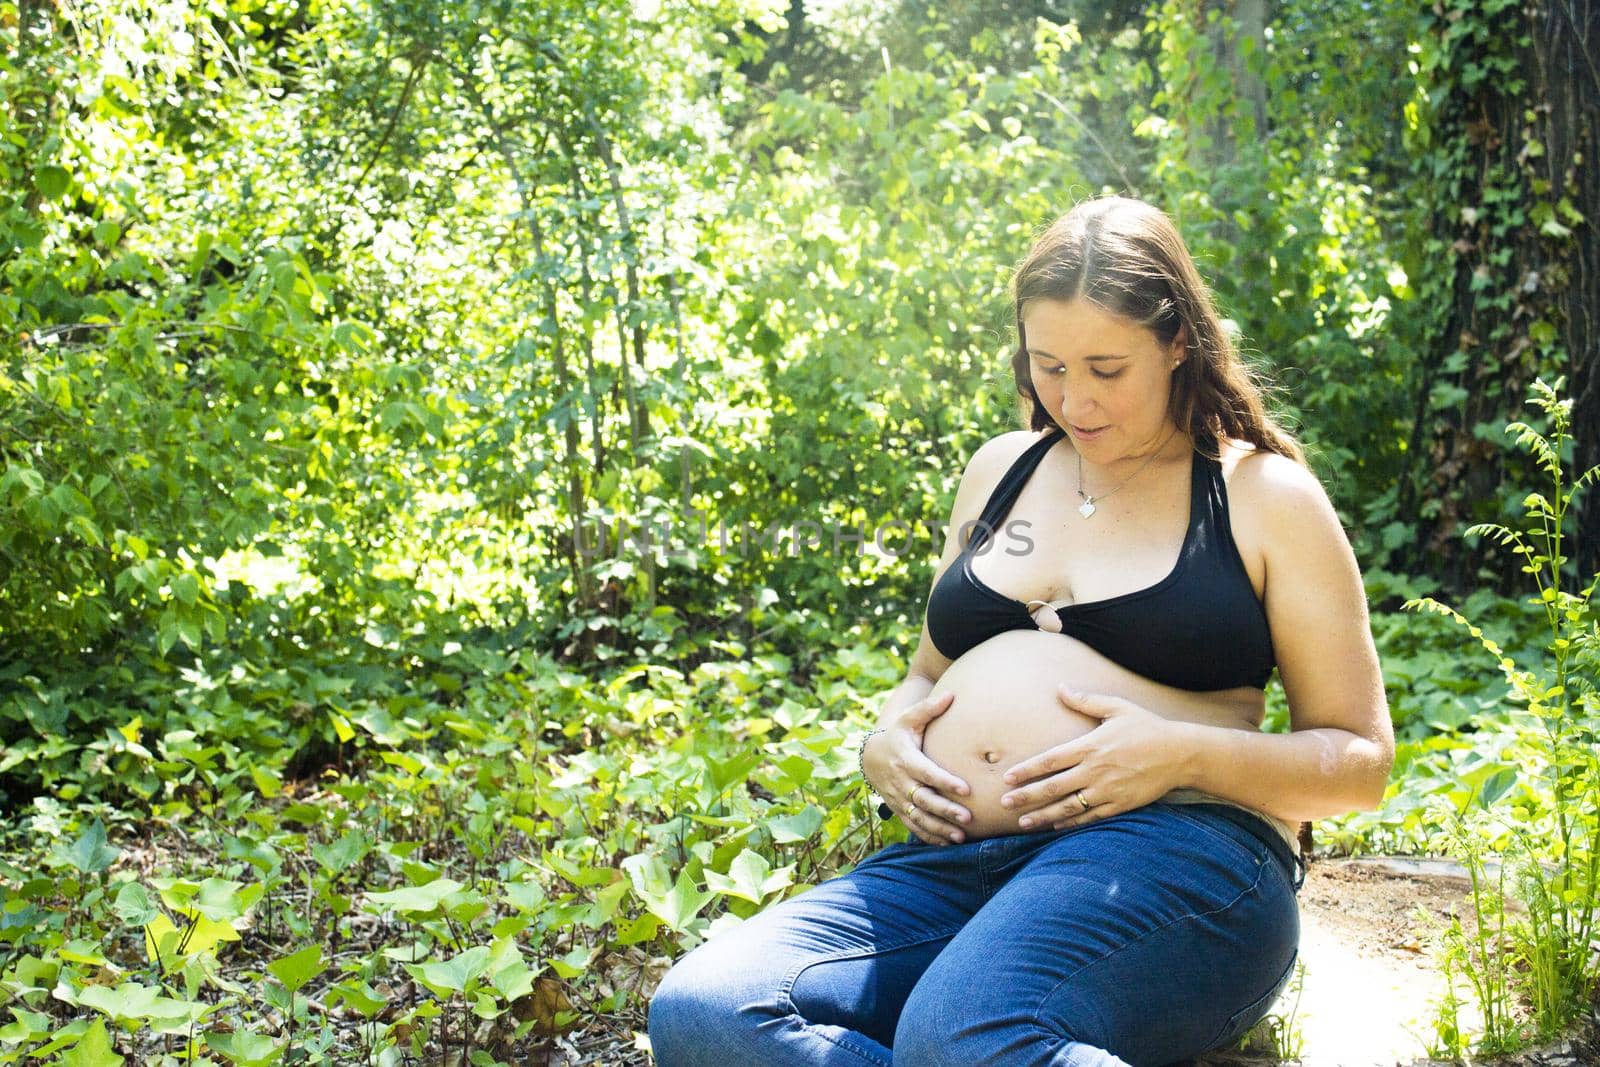 Seven month pregnant woman in a park dressed in jeans